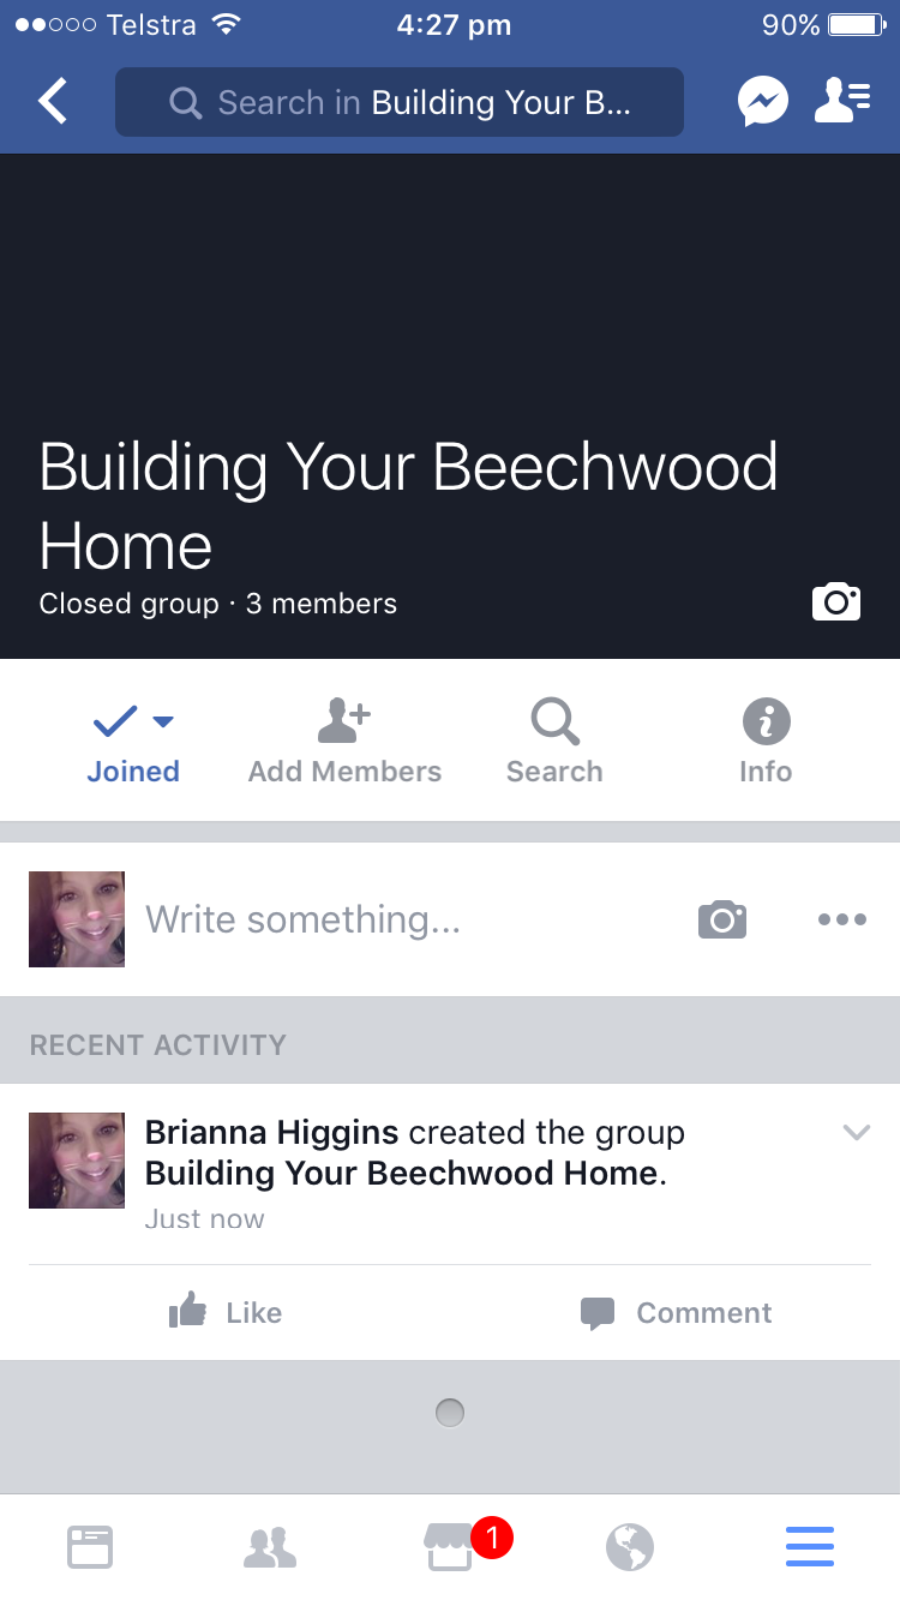 Who is building with Beechwood